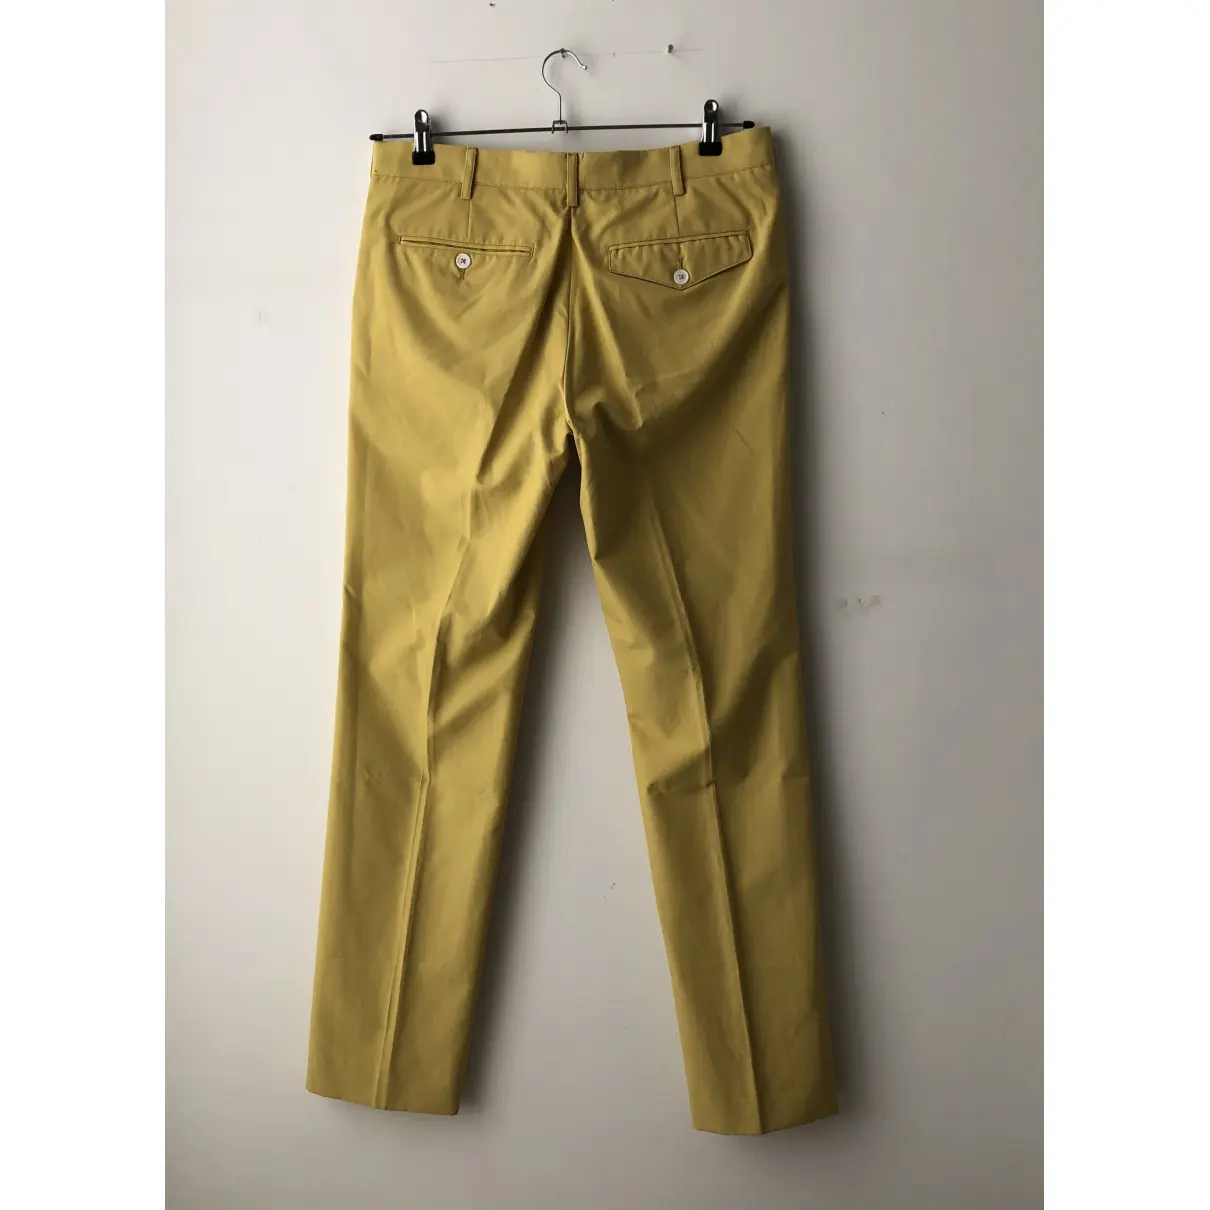 Buy Unknown Trousers online